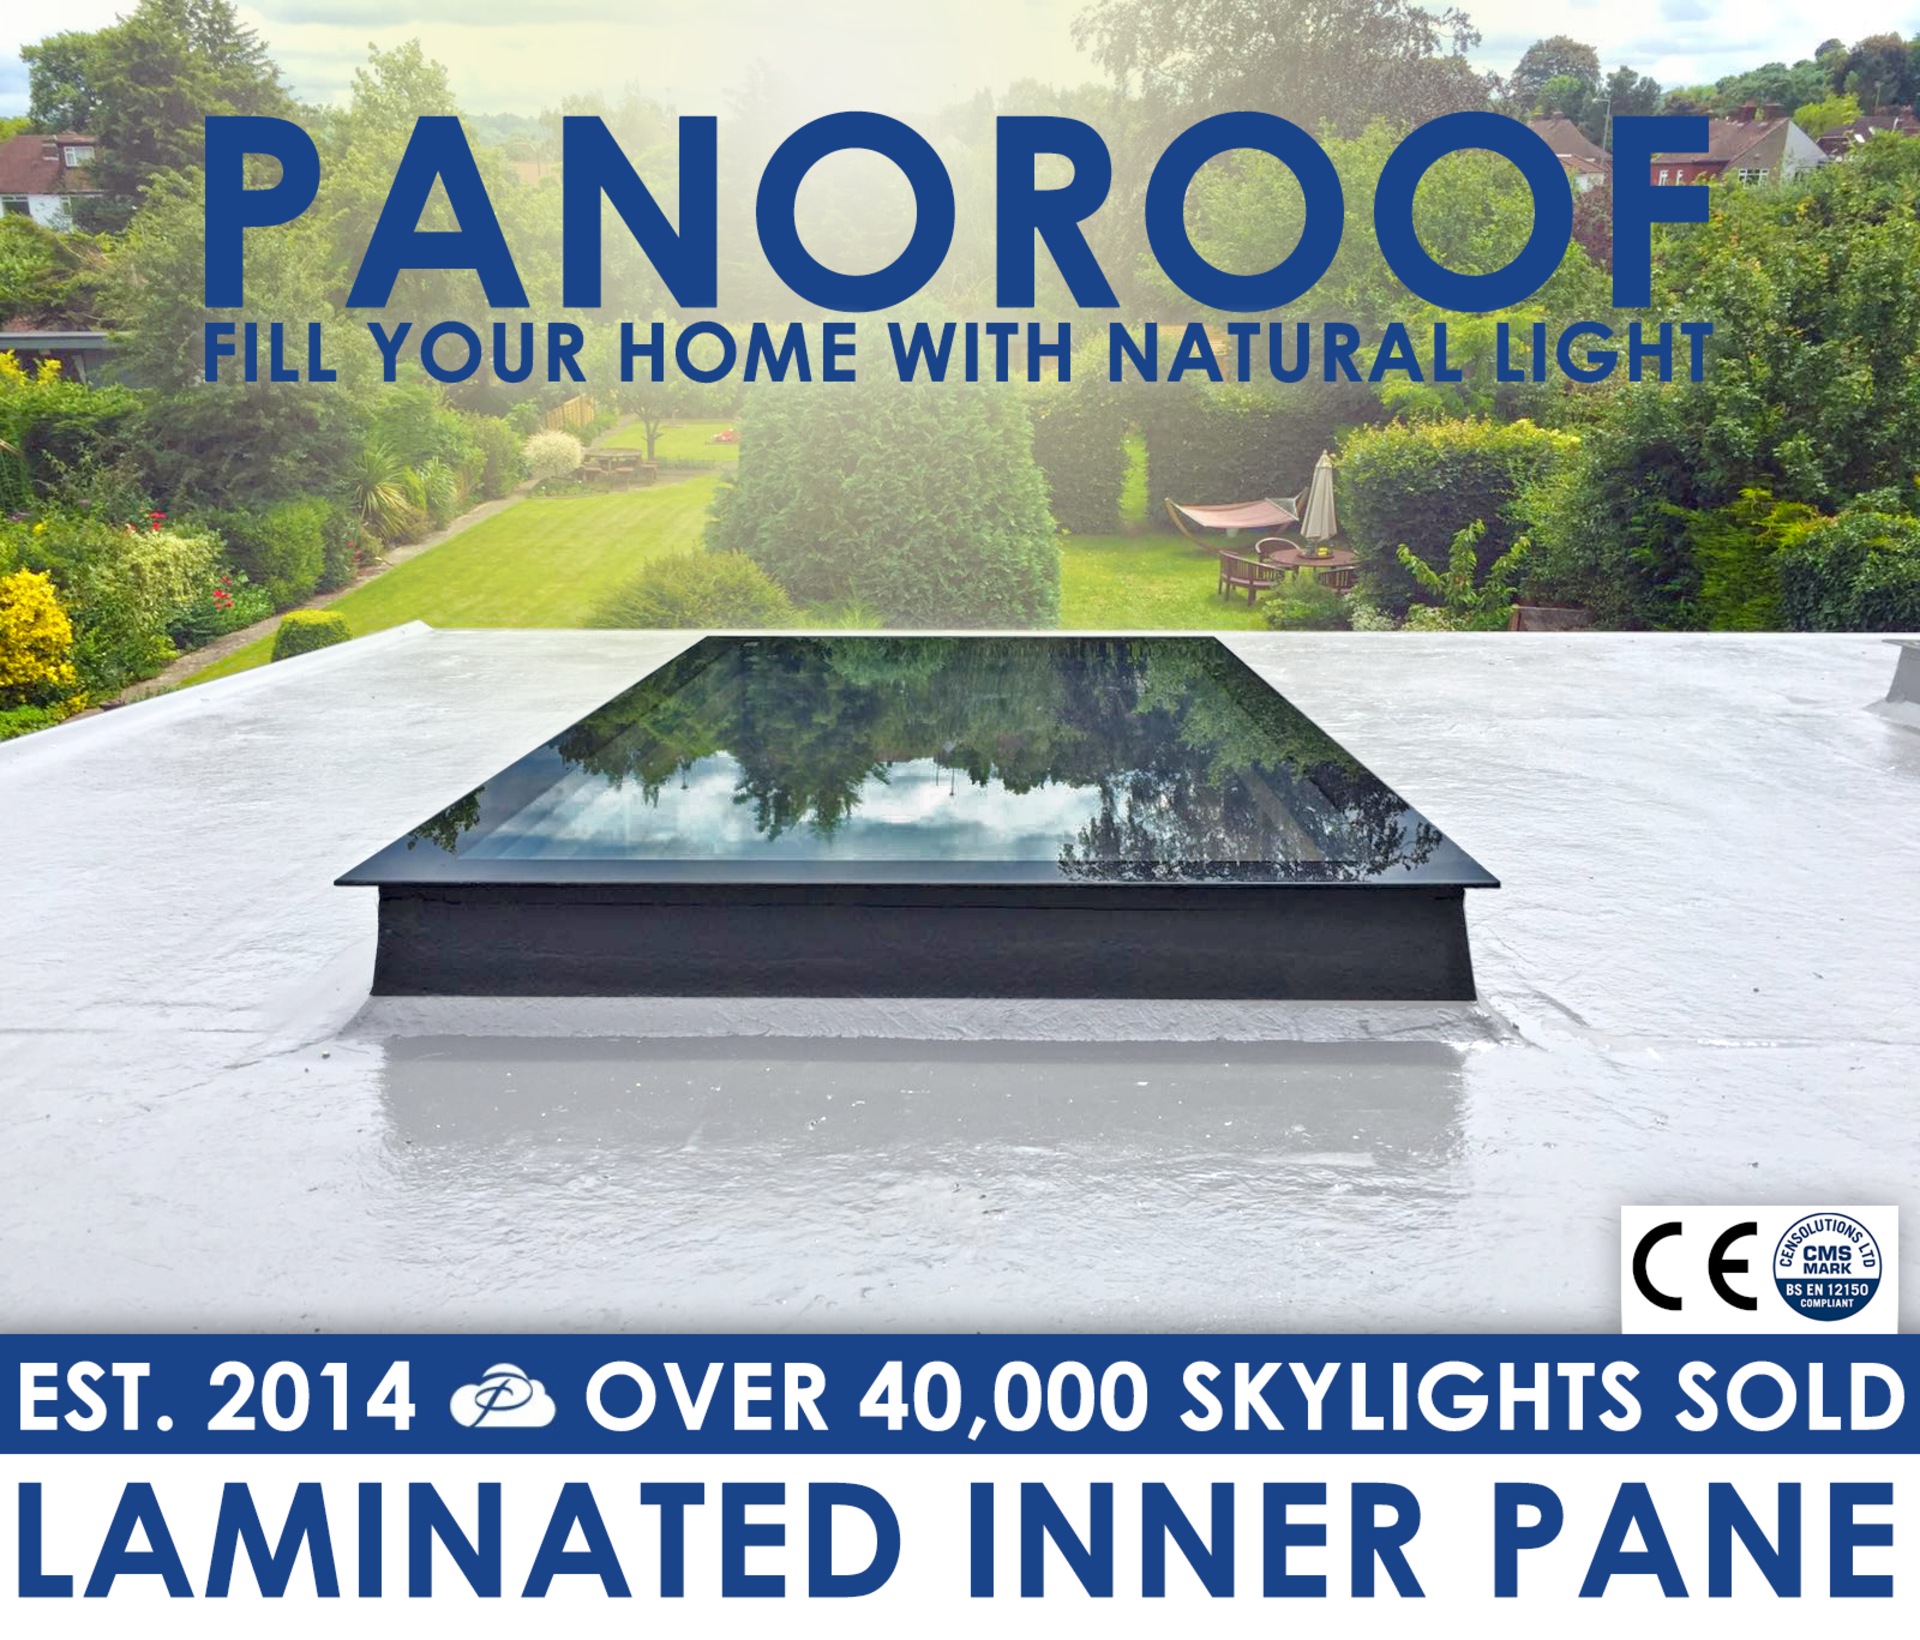 Panoroof 1000x4000mm (inside Size Visable glass area) Seamless Glass Skylight Flat Roof Rooflight